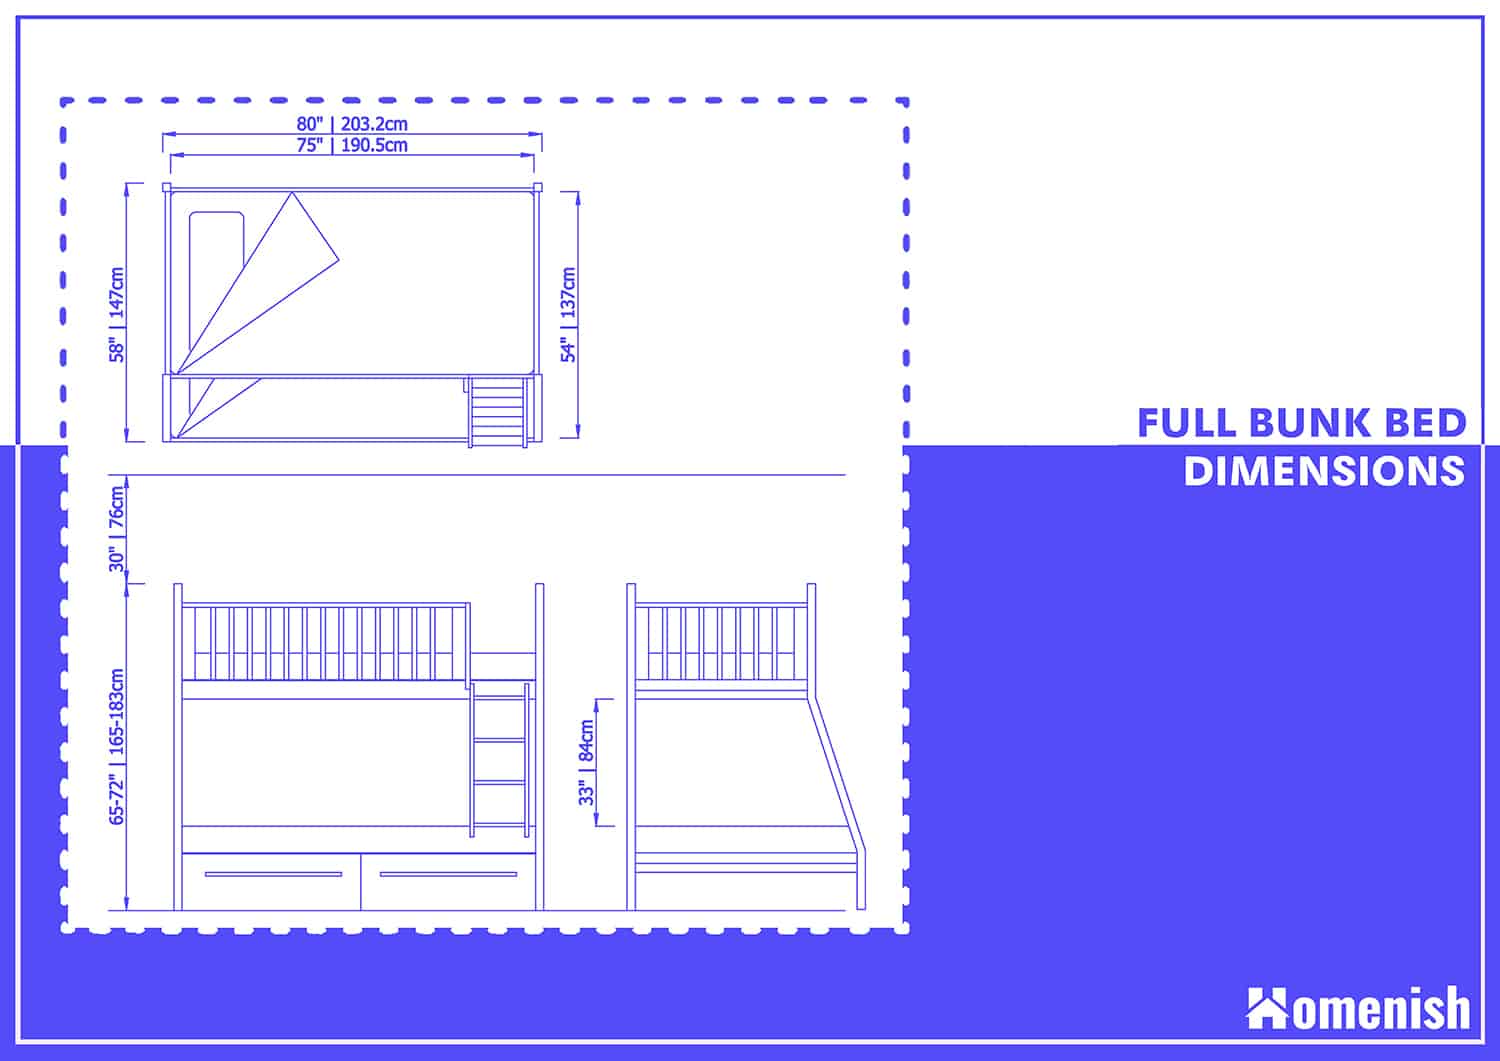 Standard Bunk Bed Dimensions With 3, Full Bunk Bed Dimensions